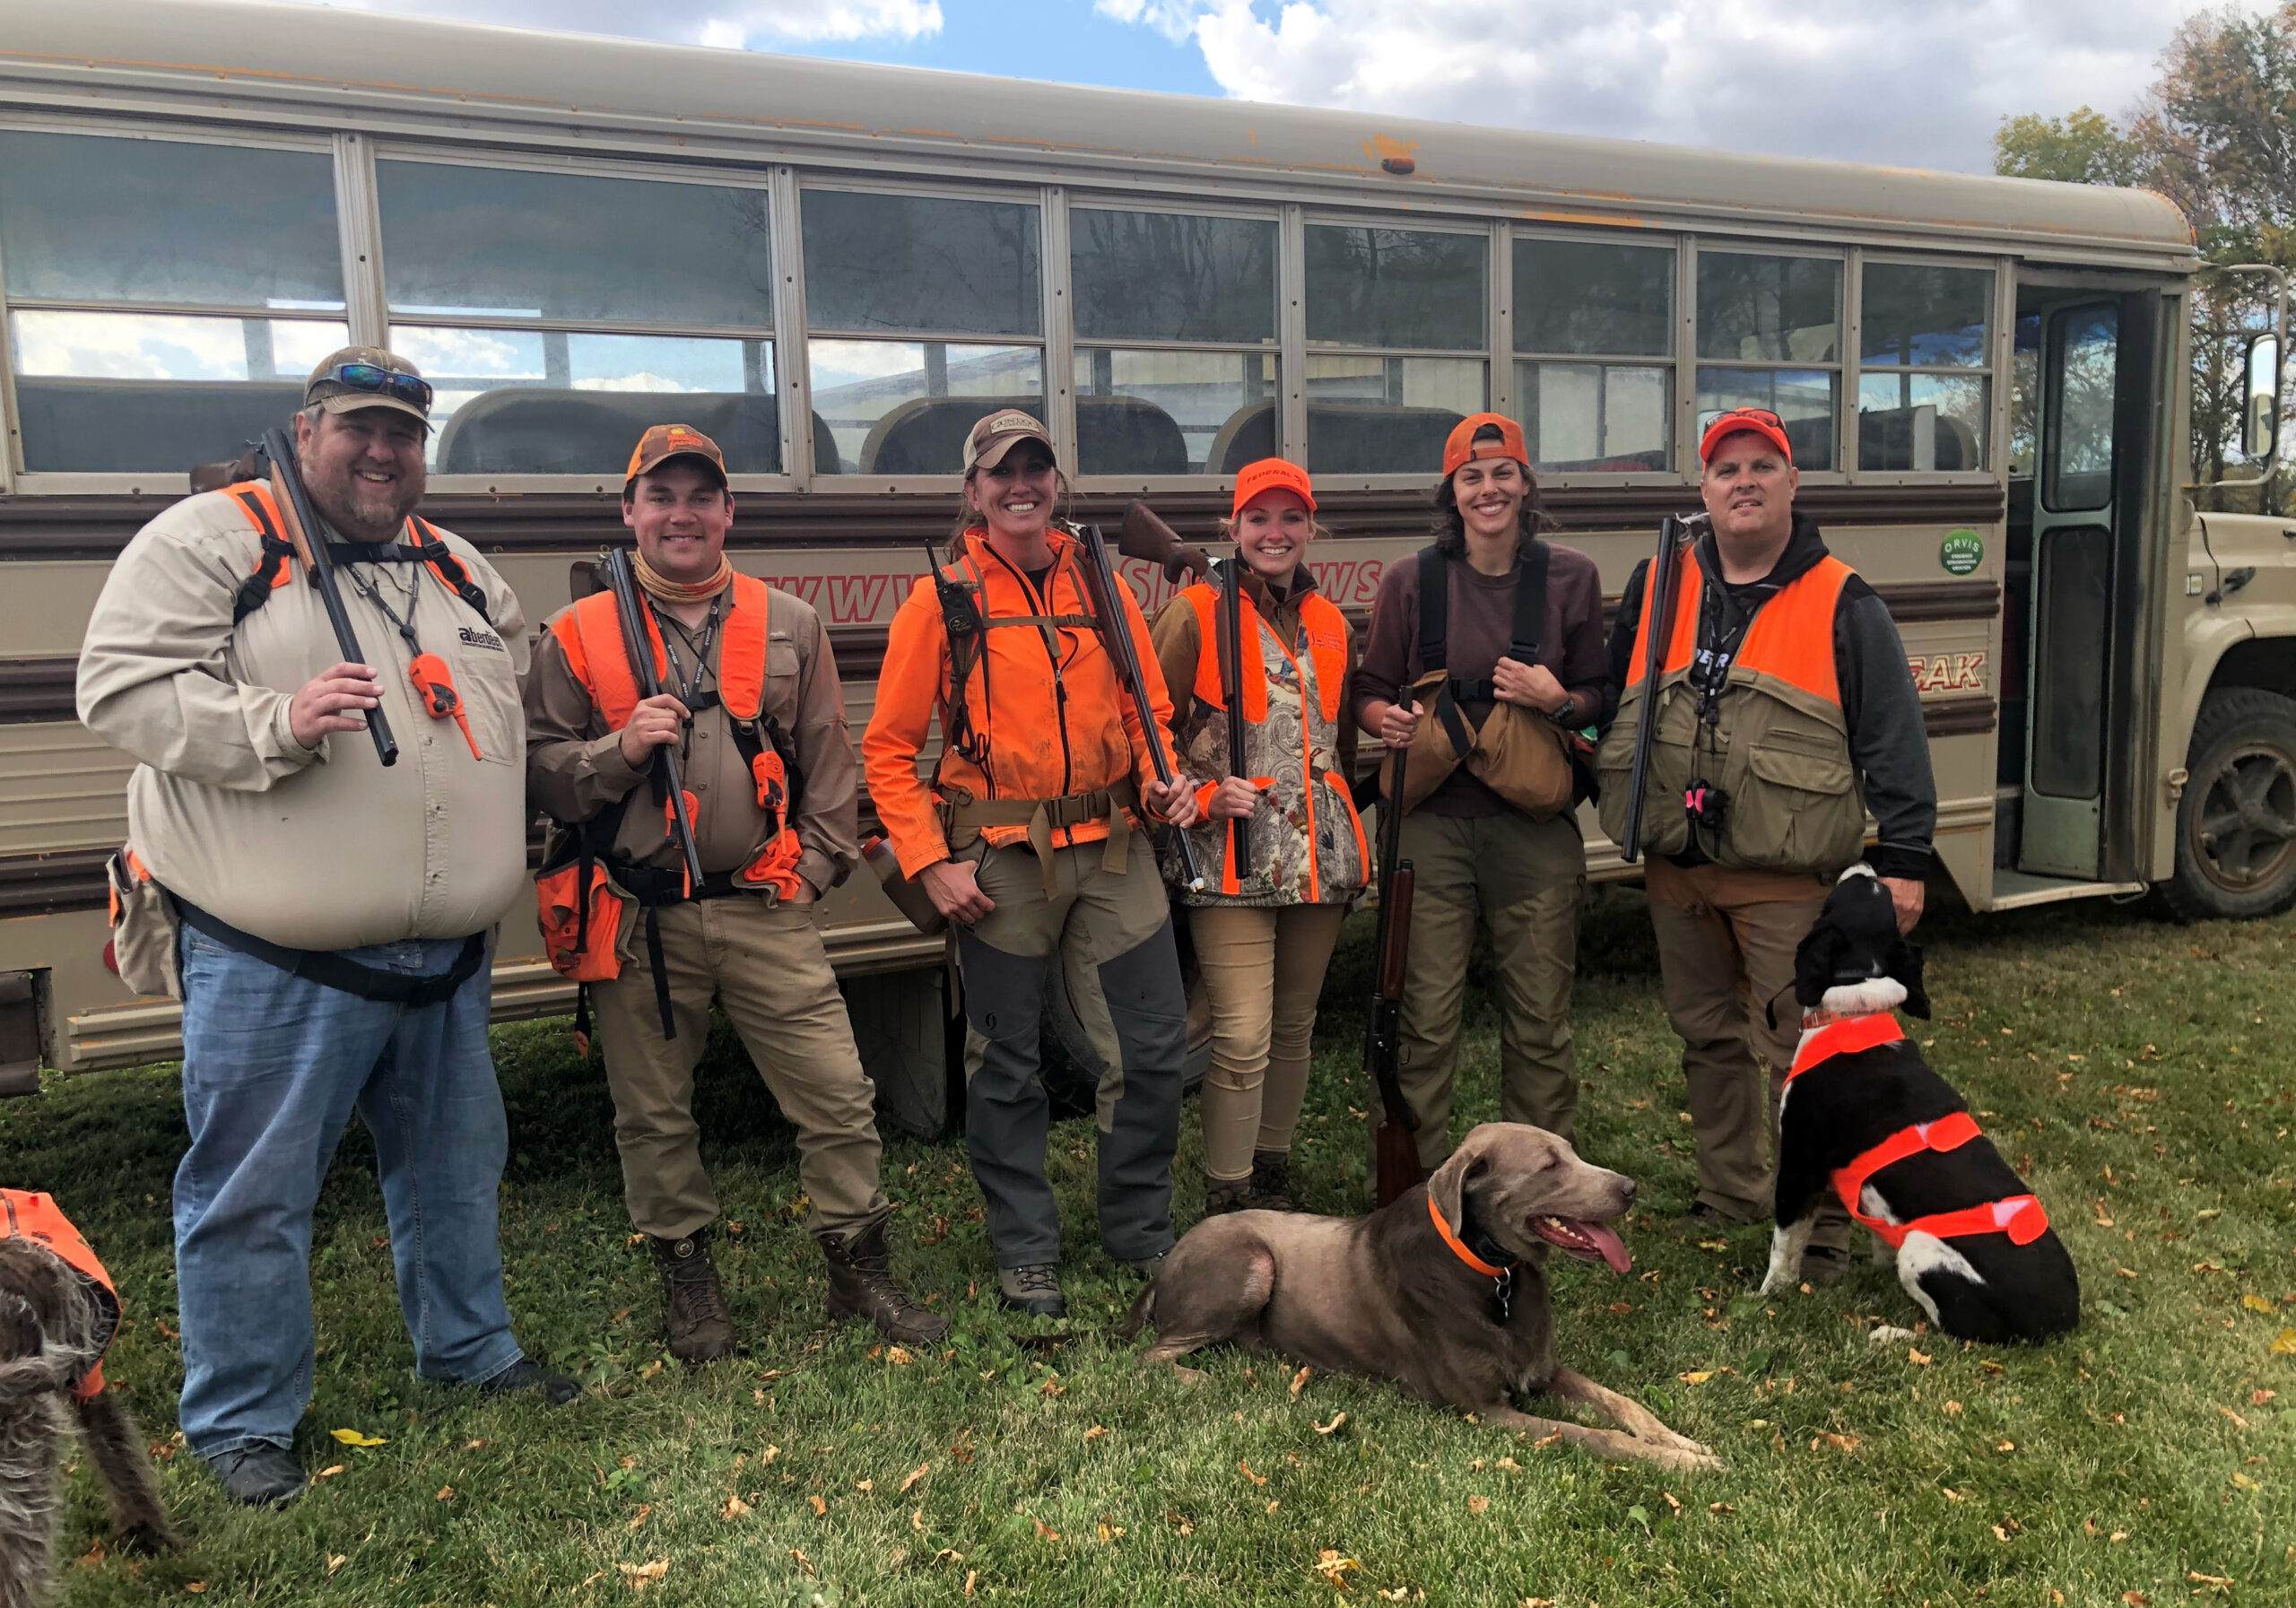 A group of hunters in orange in front of a school bus with several bird dogs.